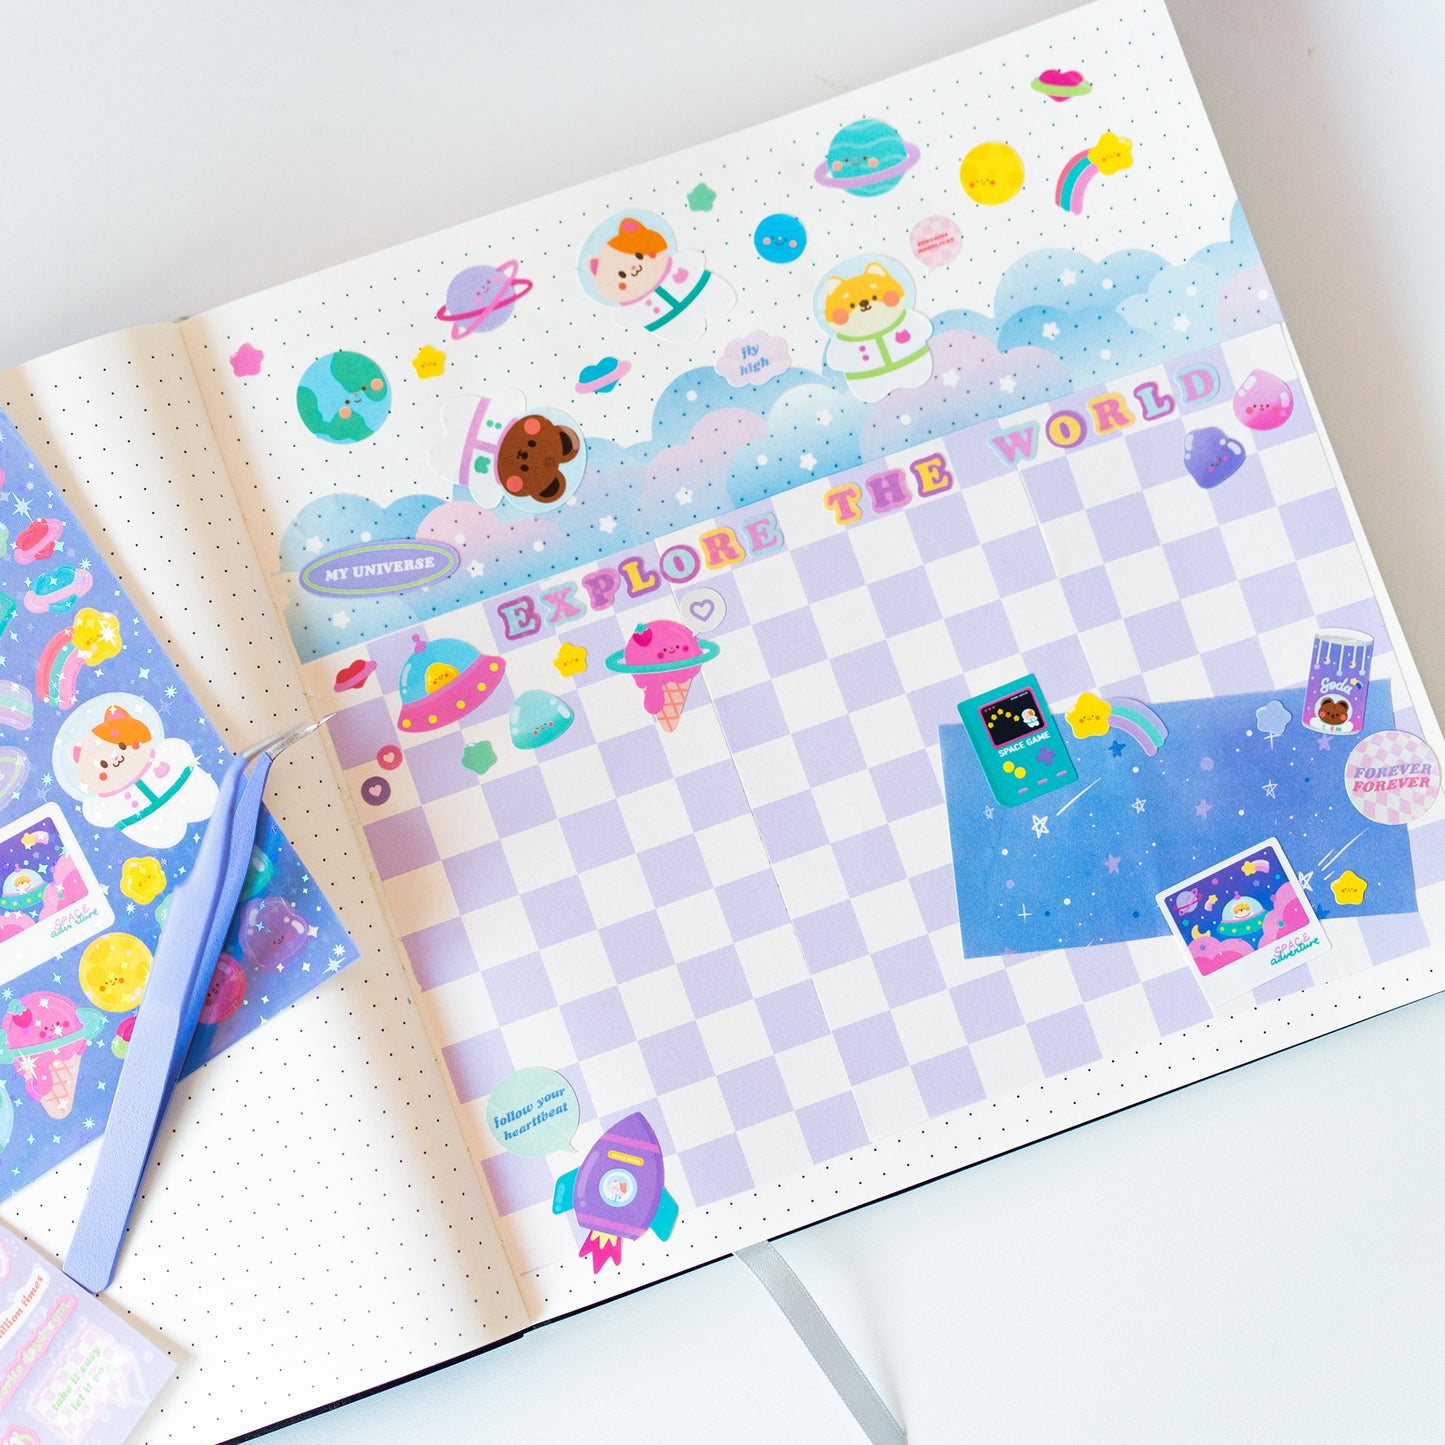 My Universe and Space Journal Sticker Sheet